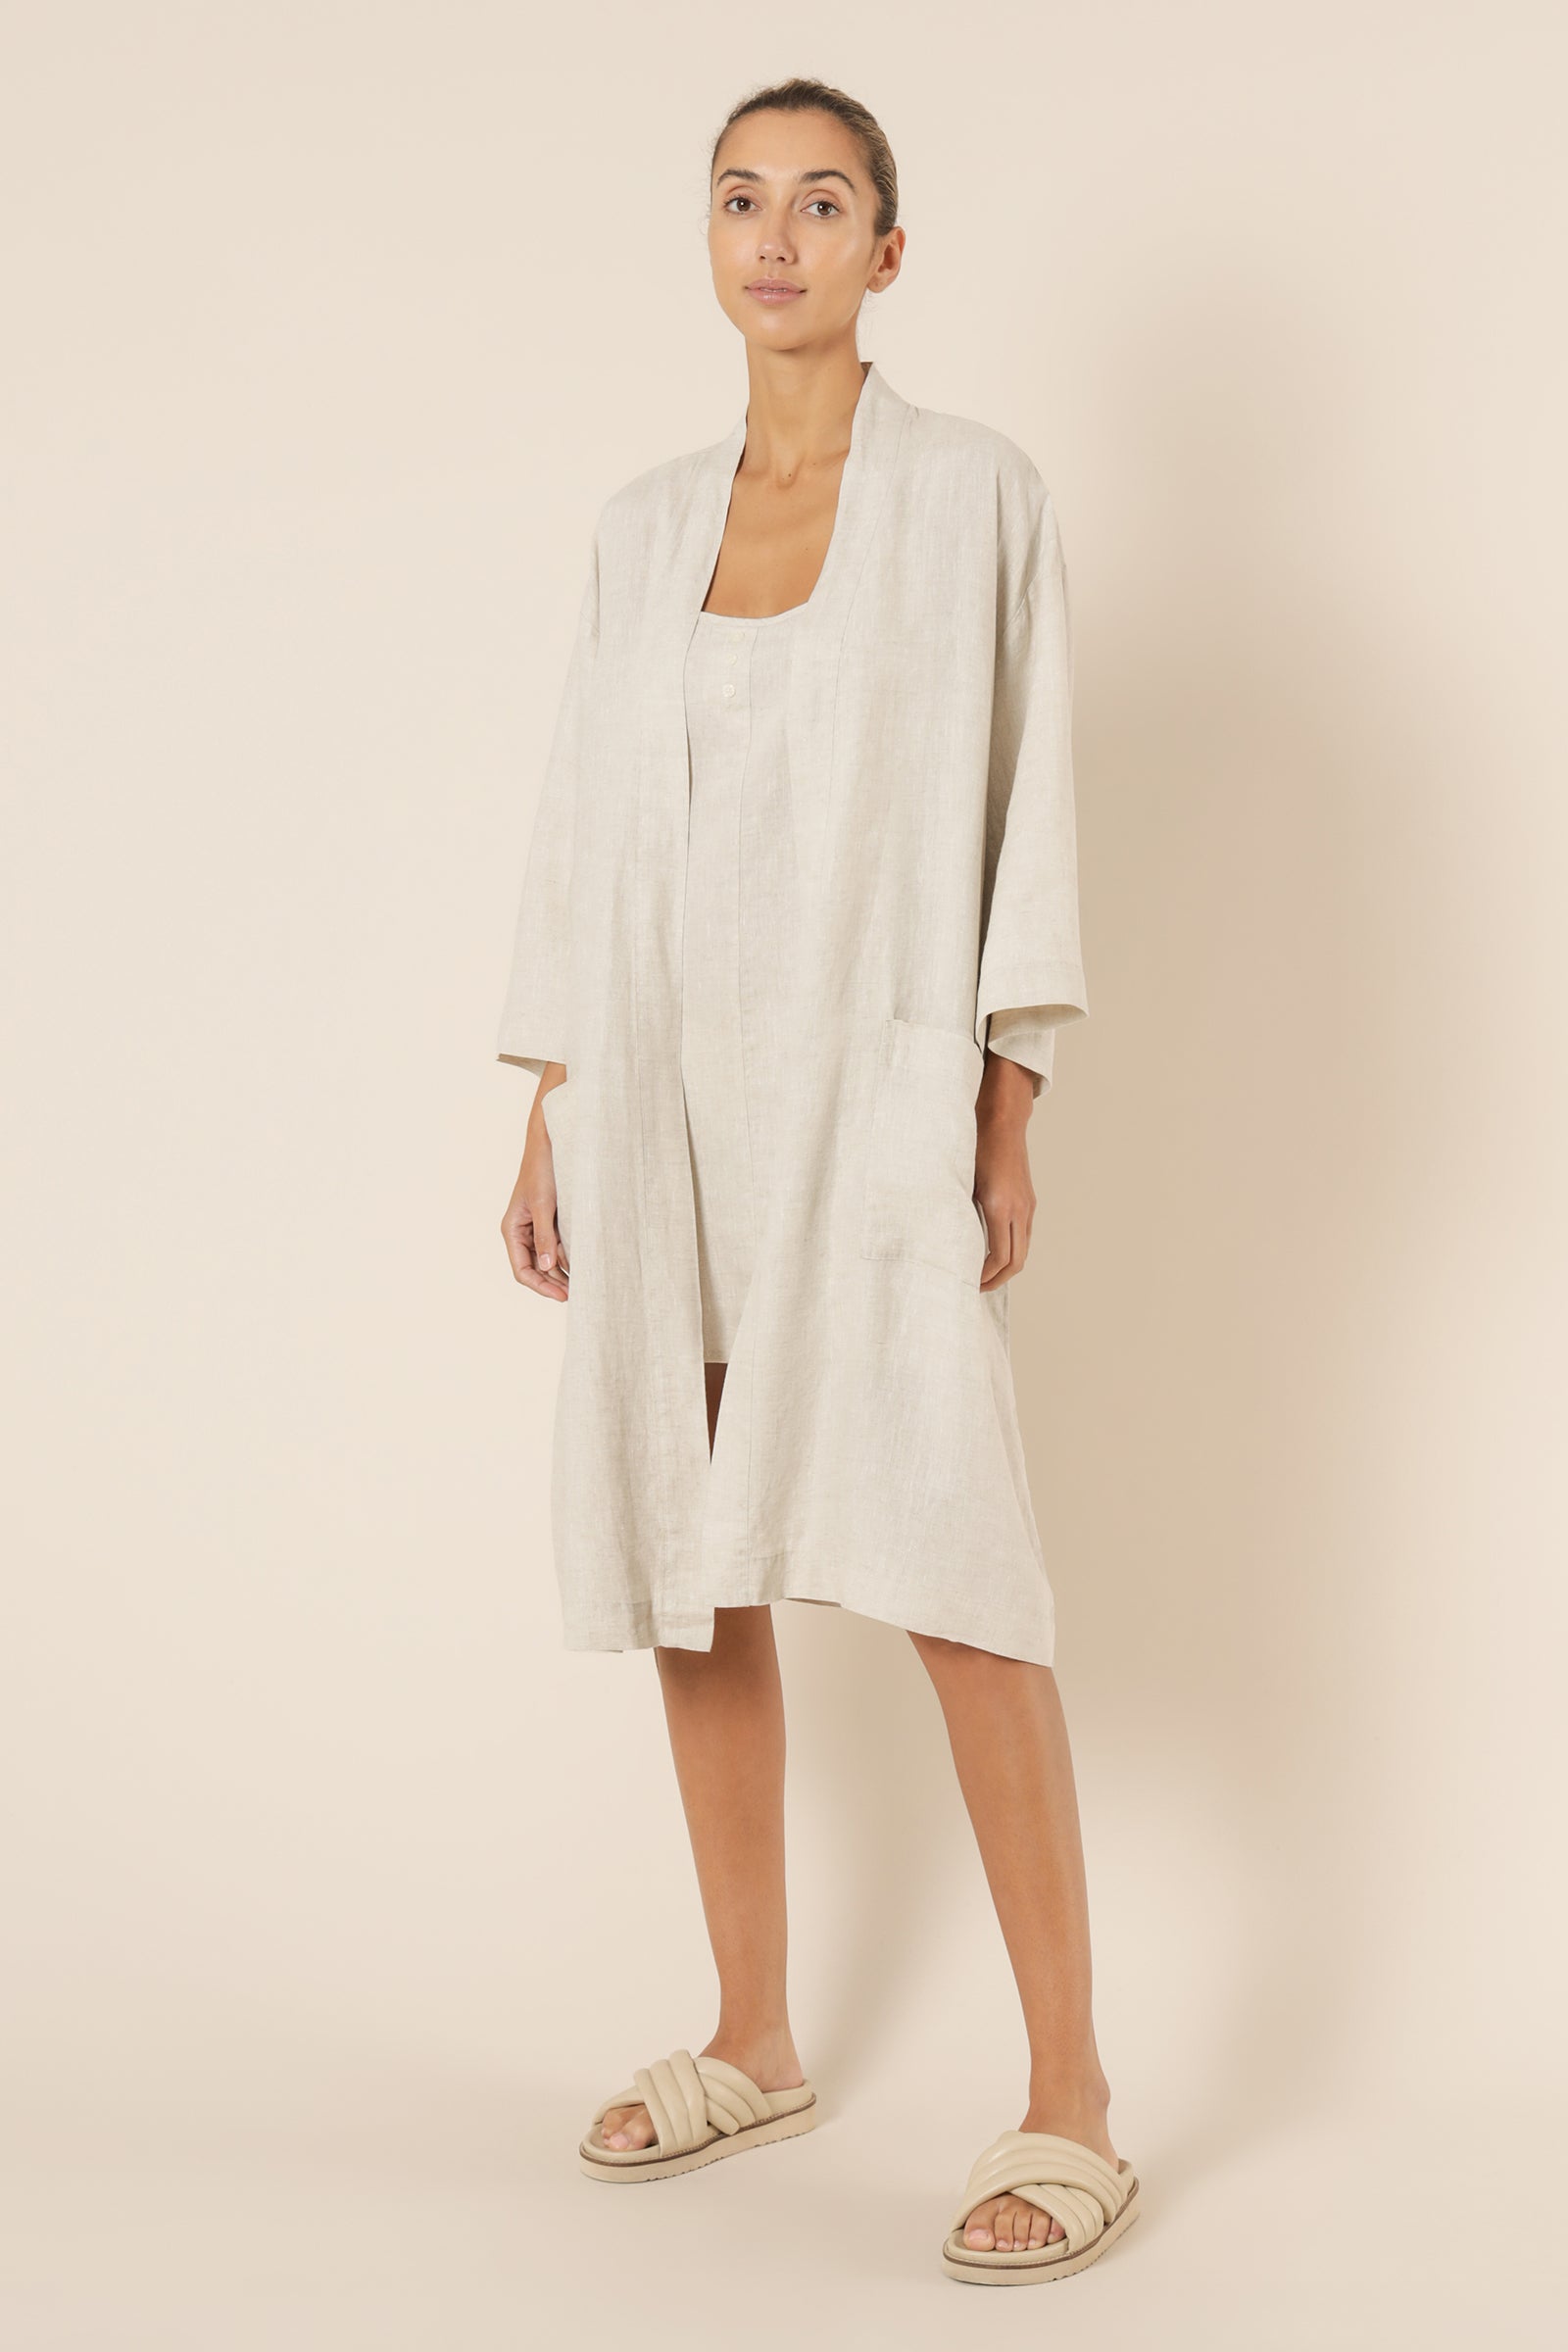 Nude Lucy Nude Lounge Linen Robe Natural 